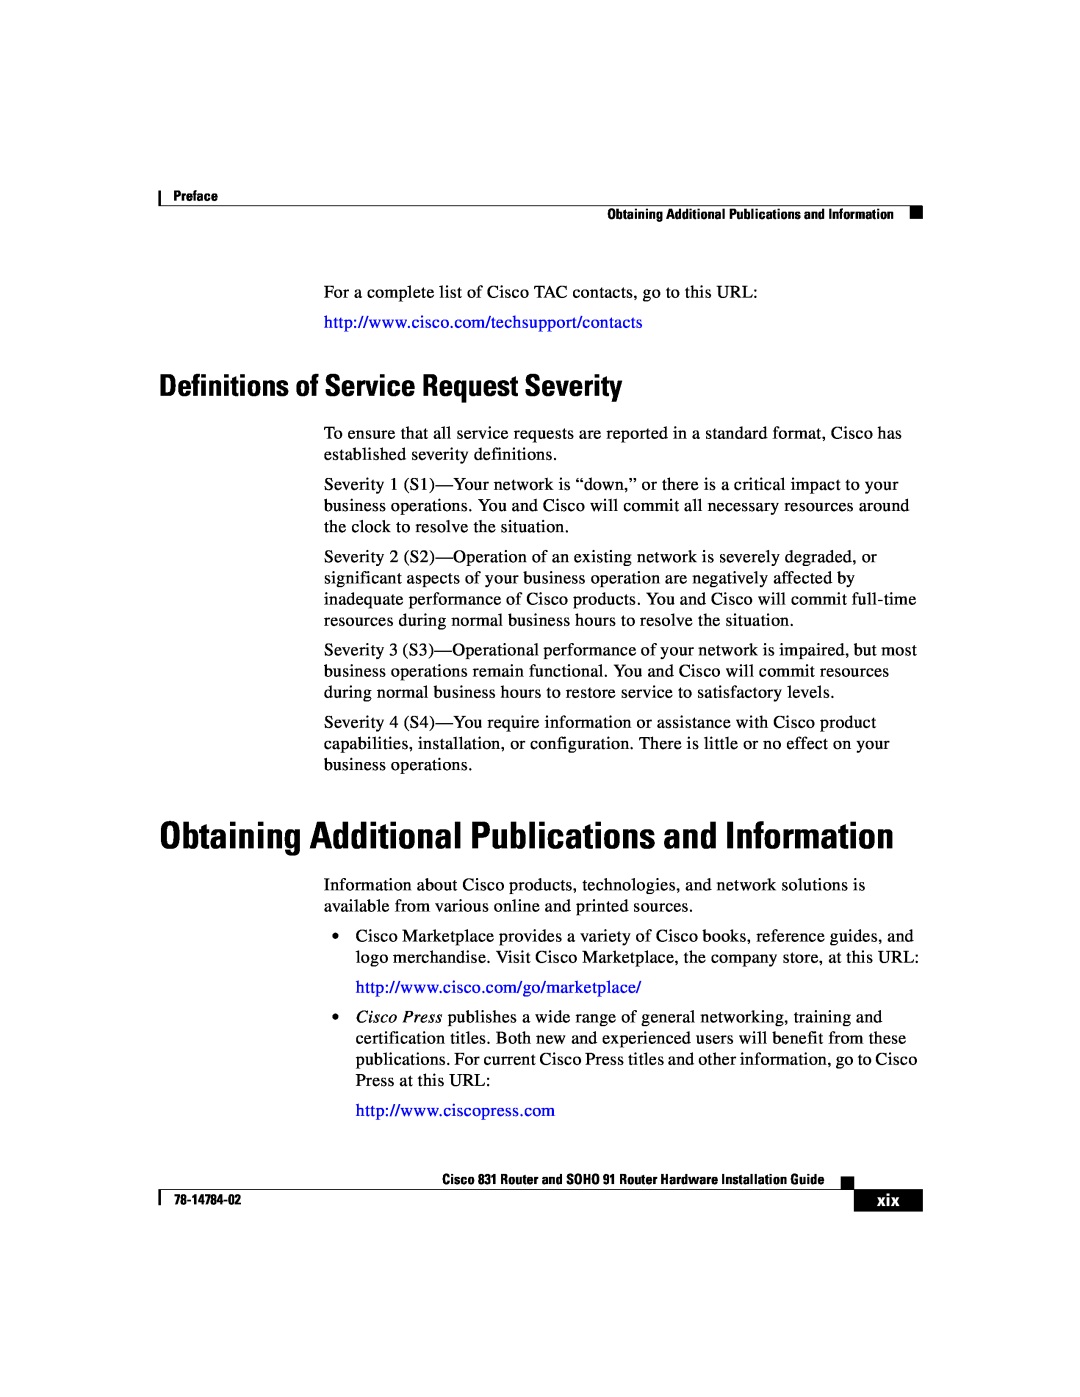 Cisco Systems 78-14784-02 manual Definitions of Service Request Severity, Obtaining Additional Publications and Information 